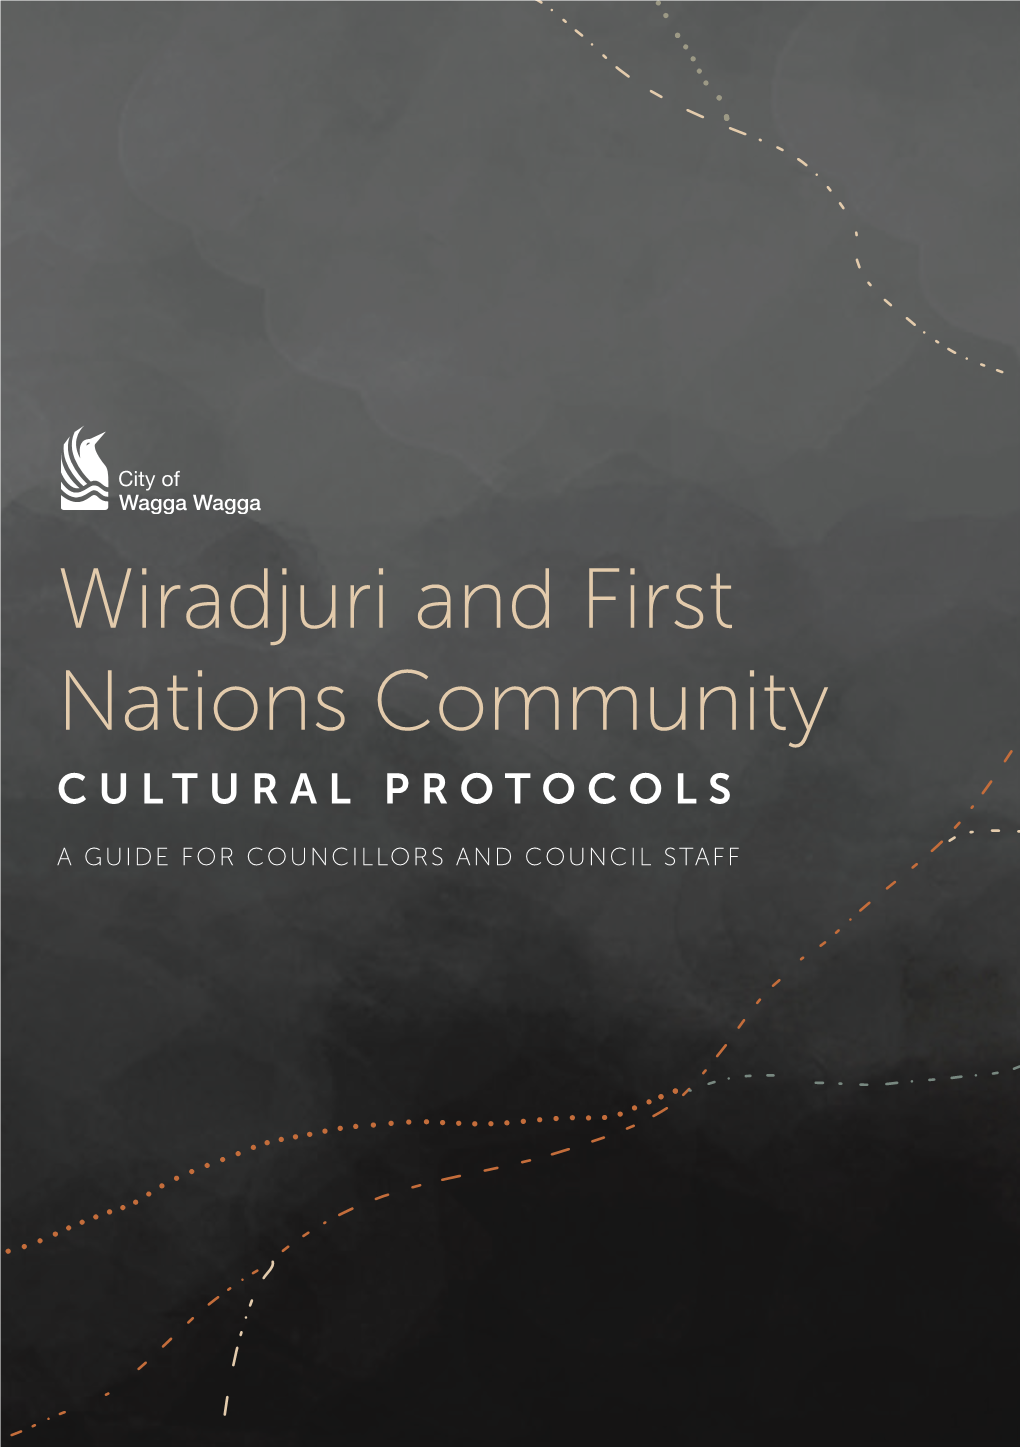 Wiradjuri and First Nations Community CULTURAL PROTOCOLS